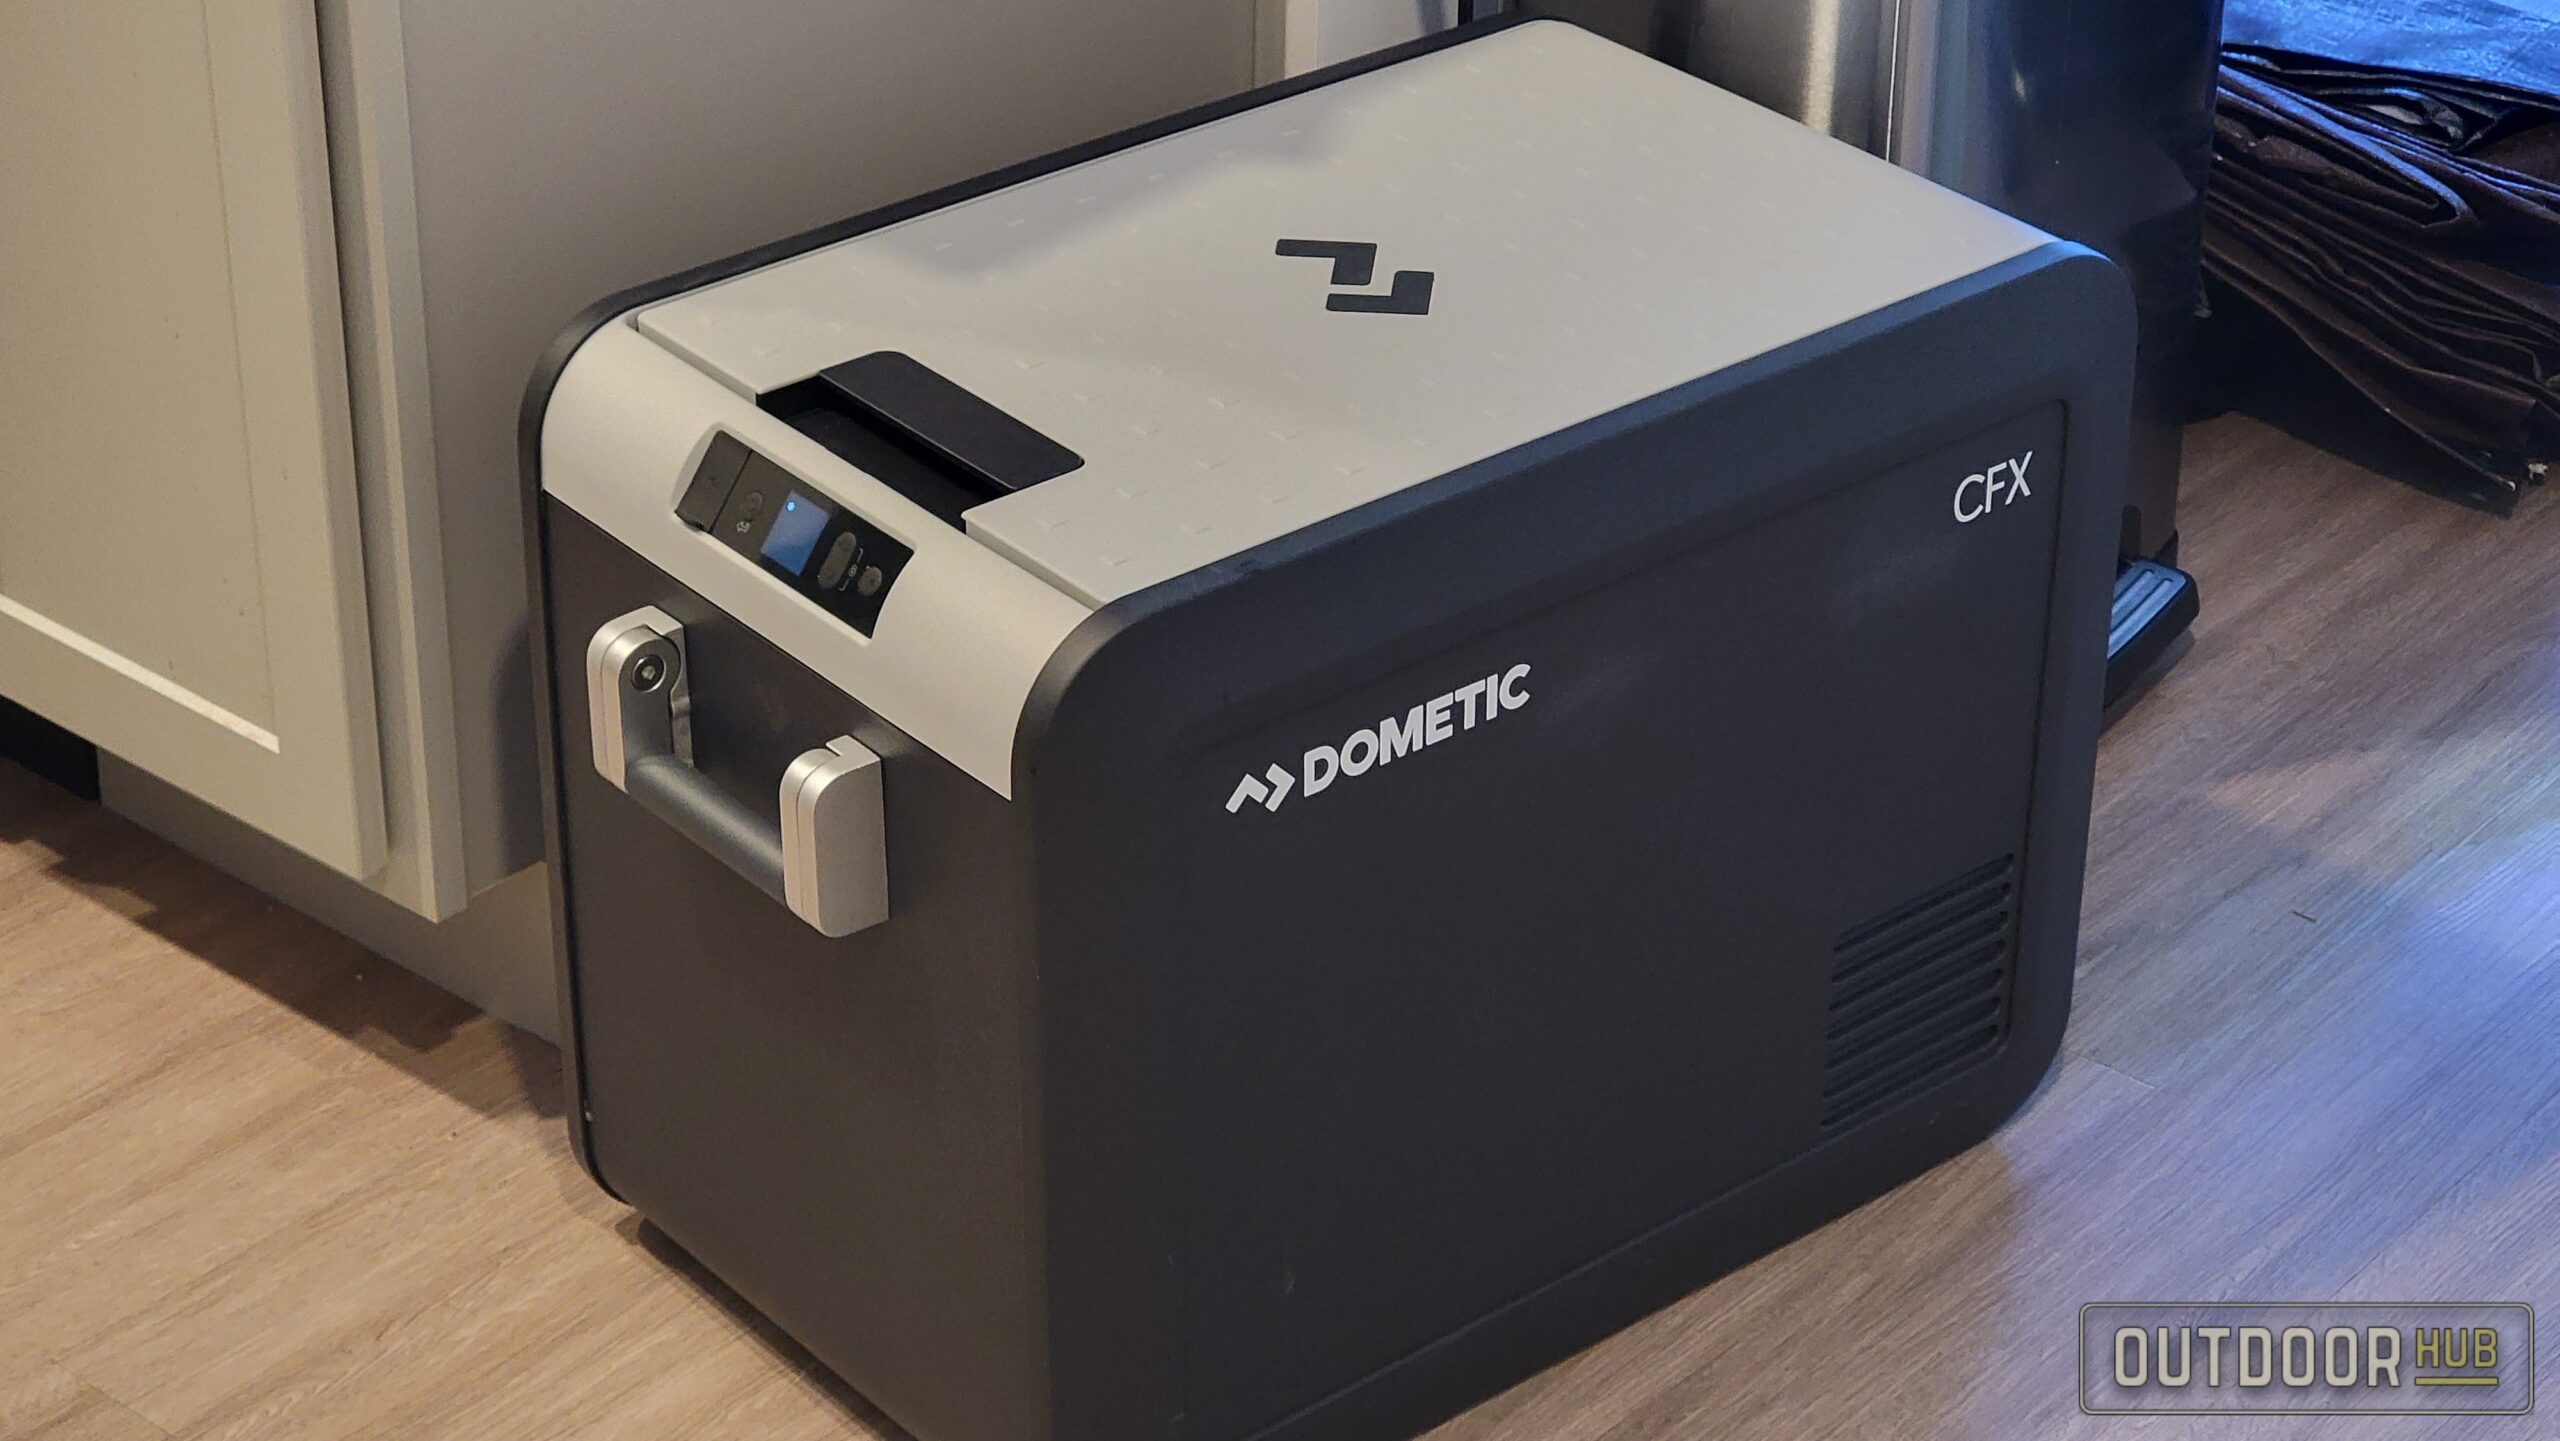 OHUB Review: The Dometic CFX3 45 Cooler - Ice Cold without the Ice